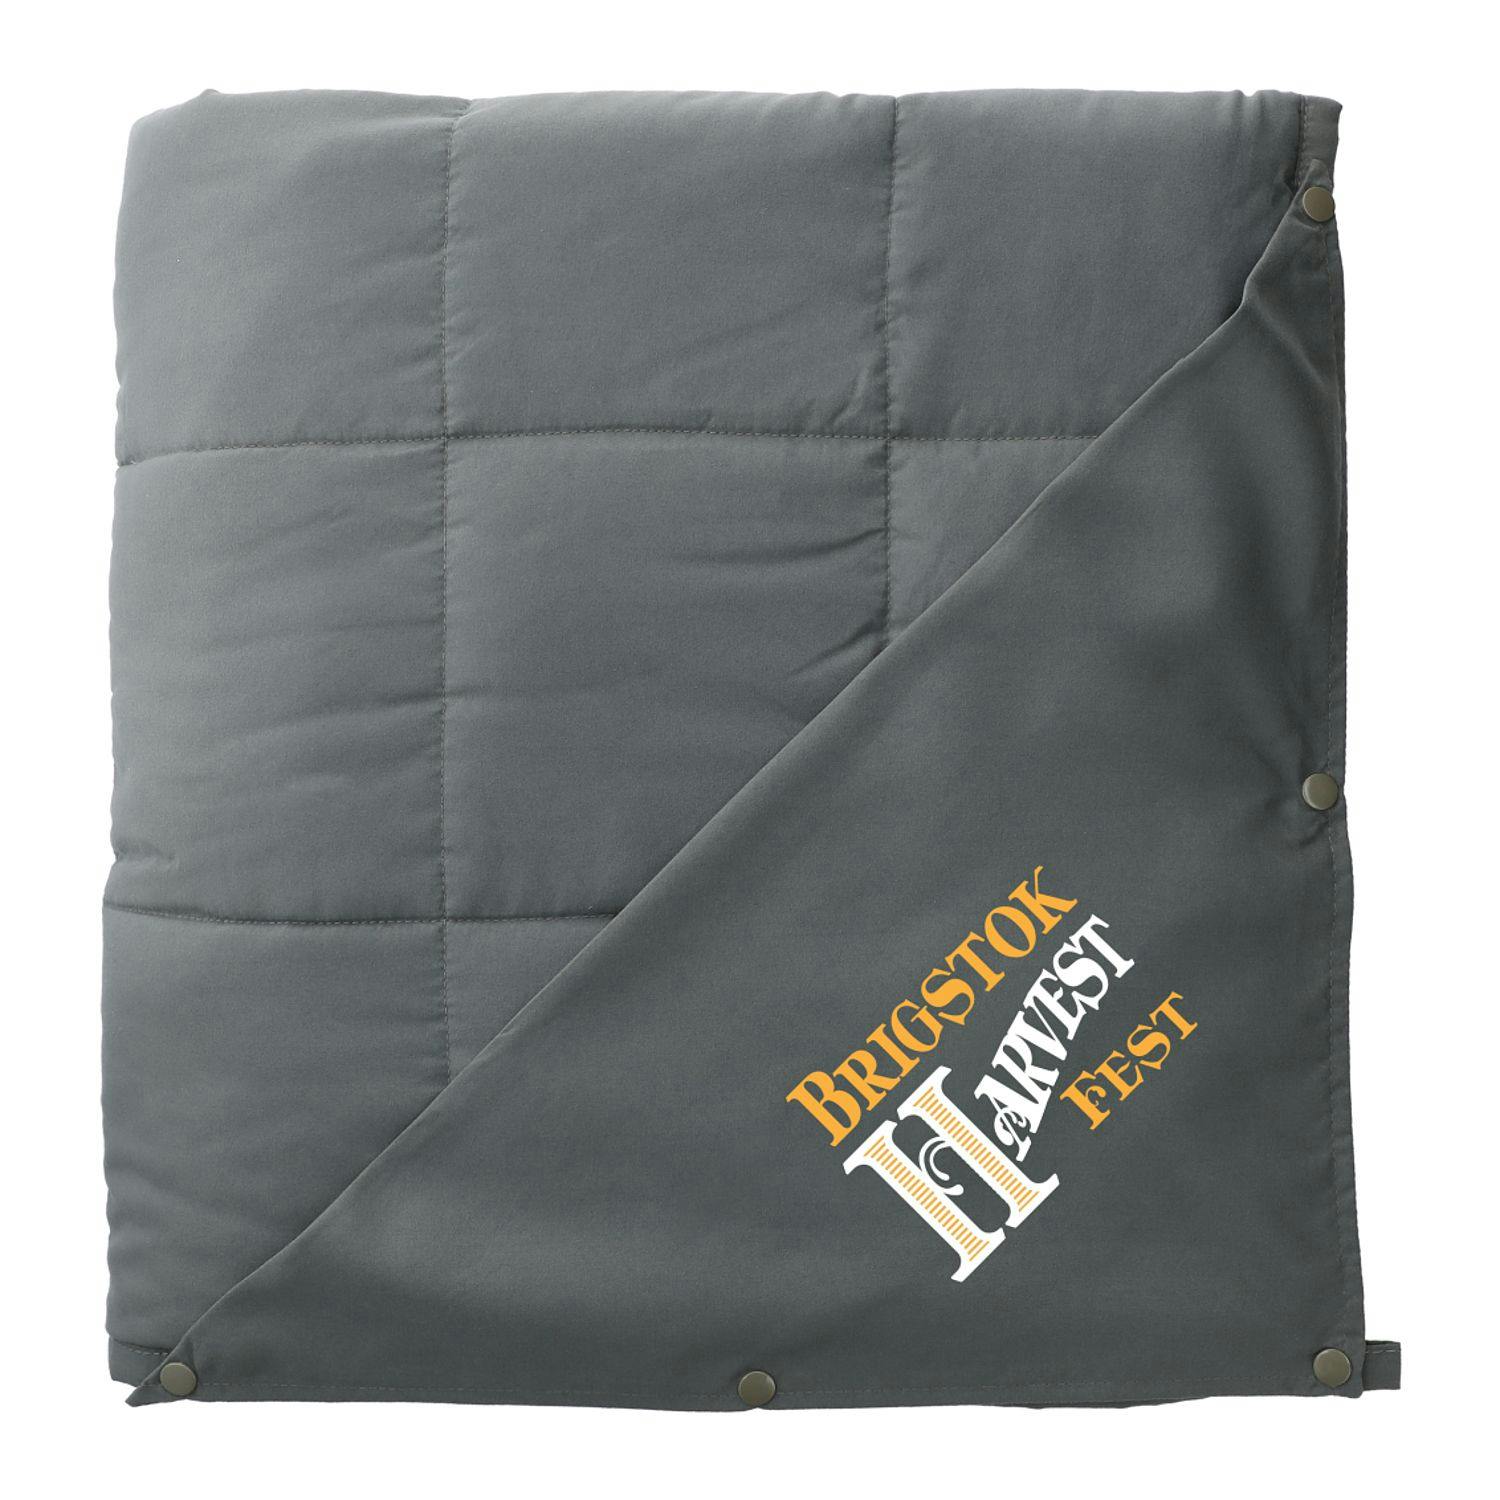 Zen 12lb Weighted Blanket - additional Image 1